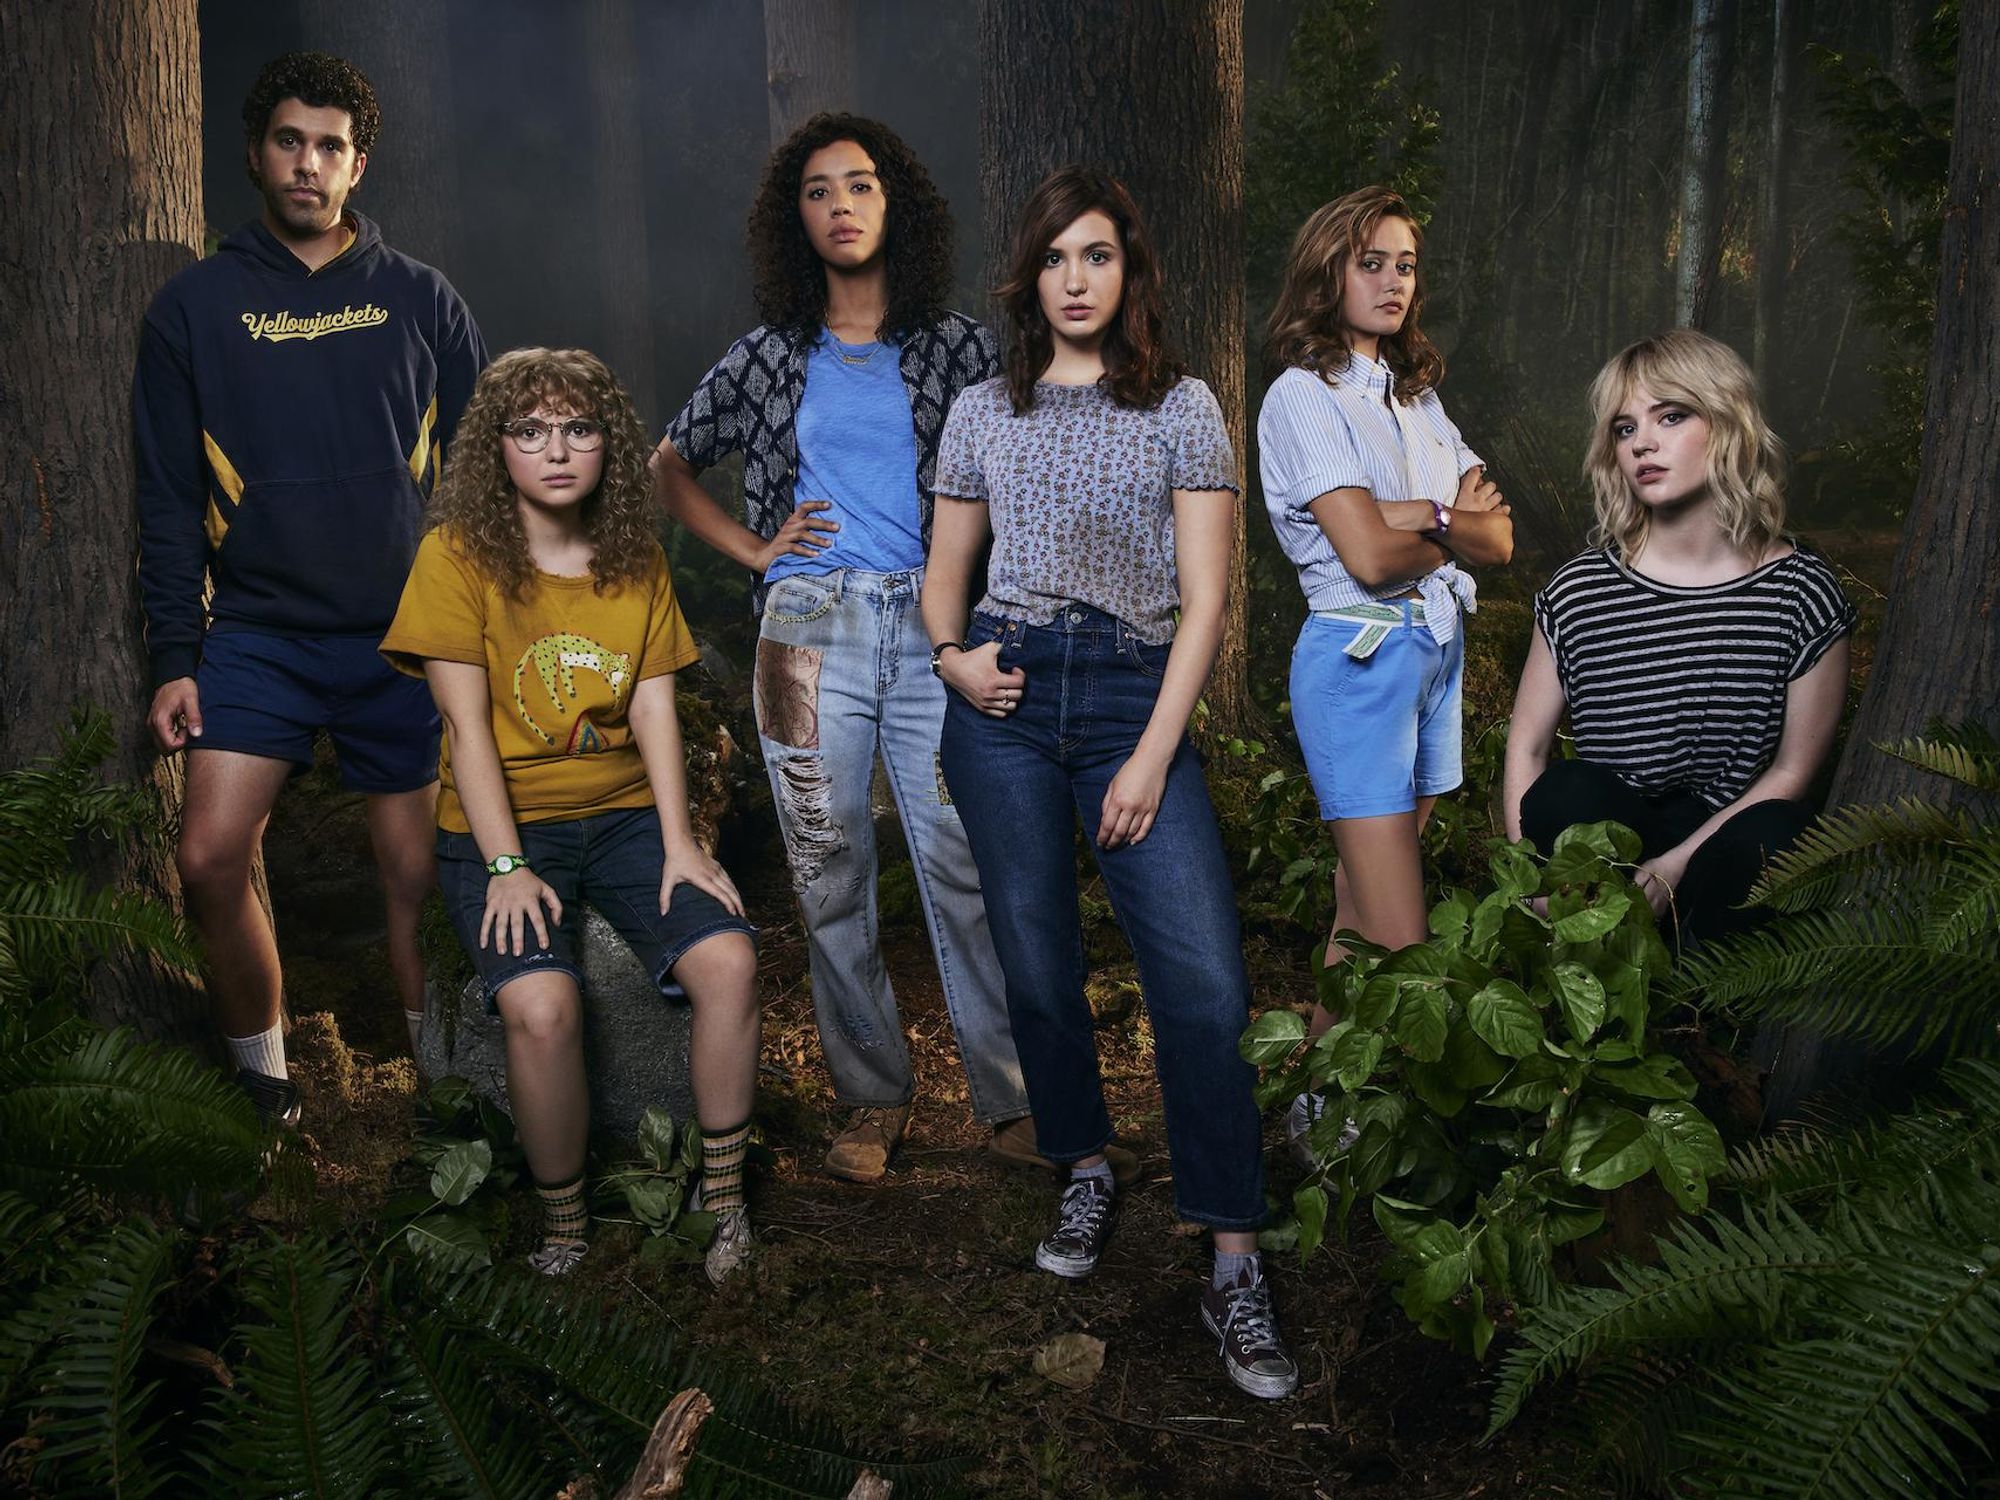 A group of teenagers stand in a wooded area surrounded by plants and trees looking serious.